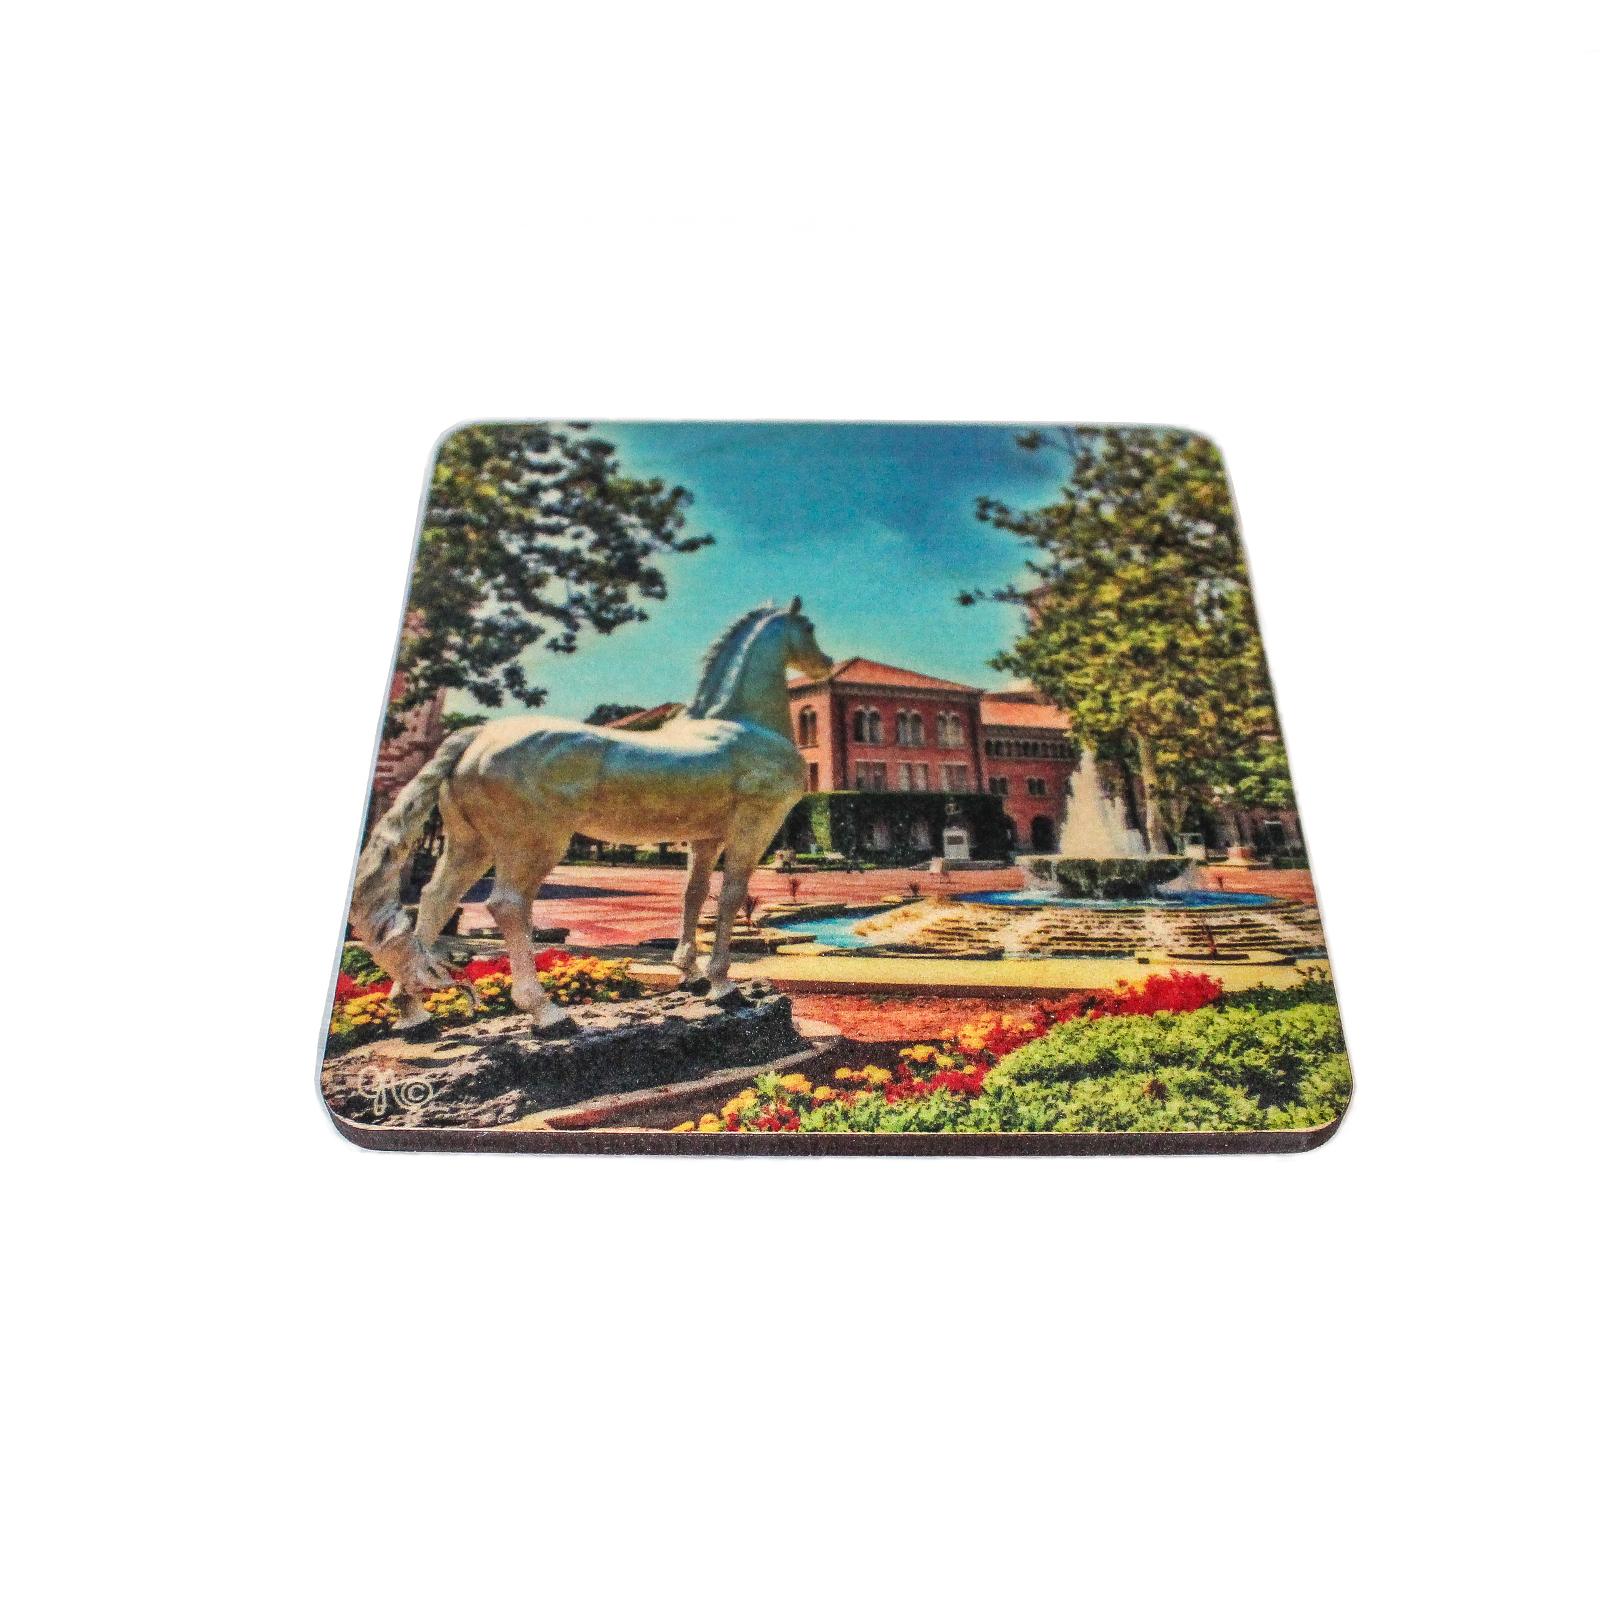 USC Traveler Statue Wooden Coaster by Preserve Press image01